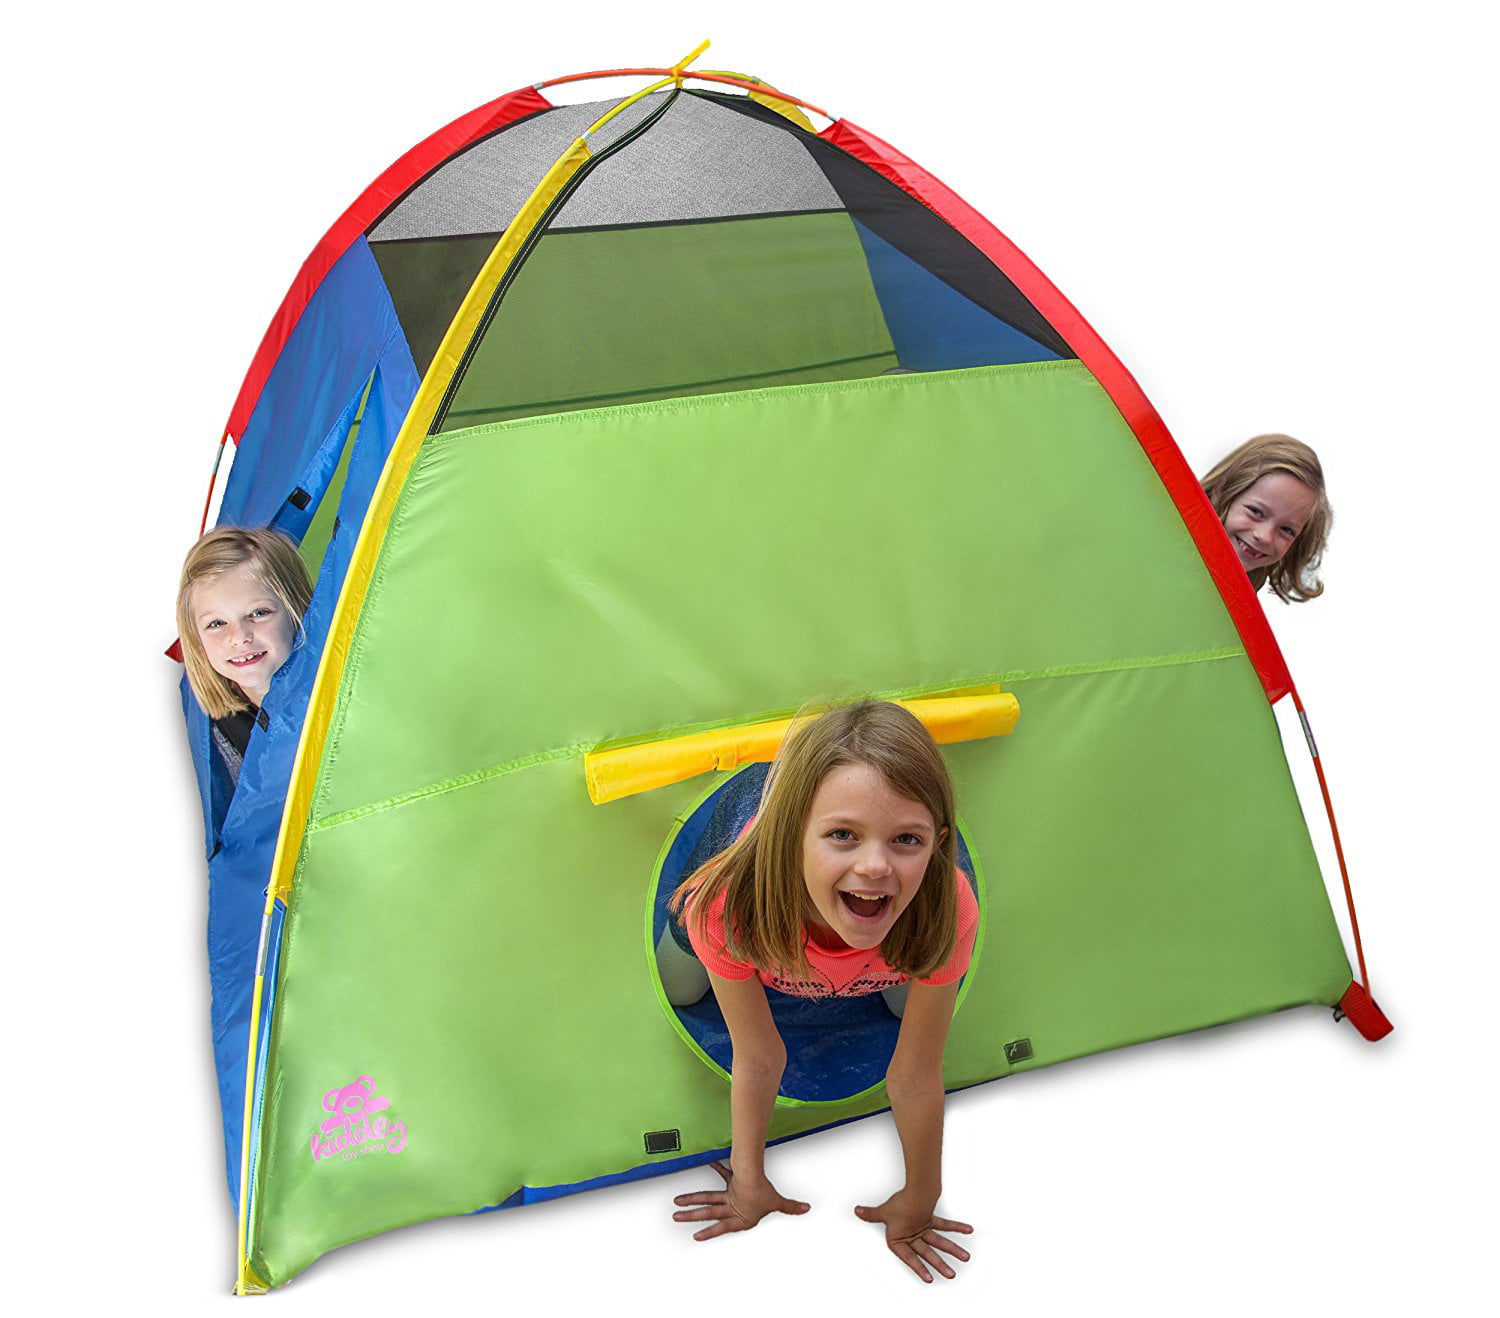 Kids Play Tent & Playhouse - Indoor/Outdoor Toddler Playhouse for Boys and Girls - Promotes ...